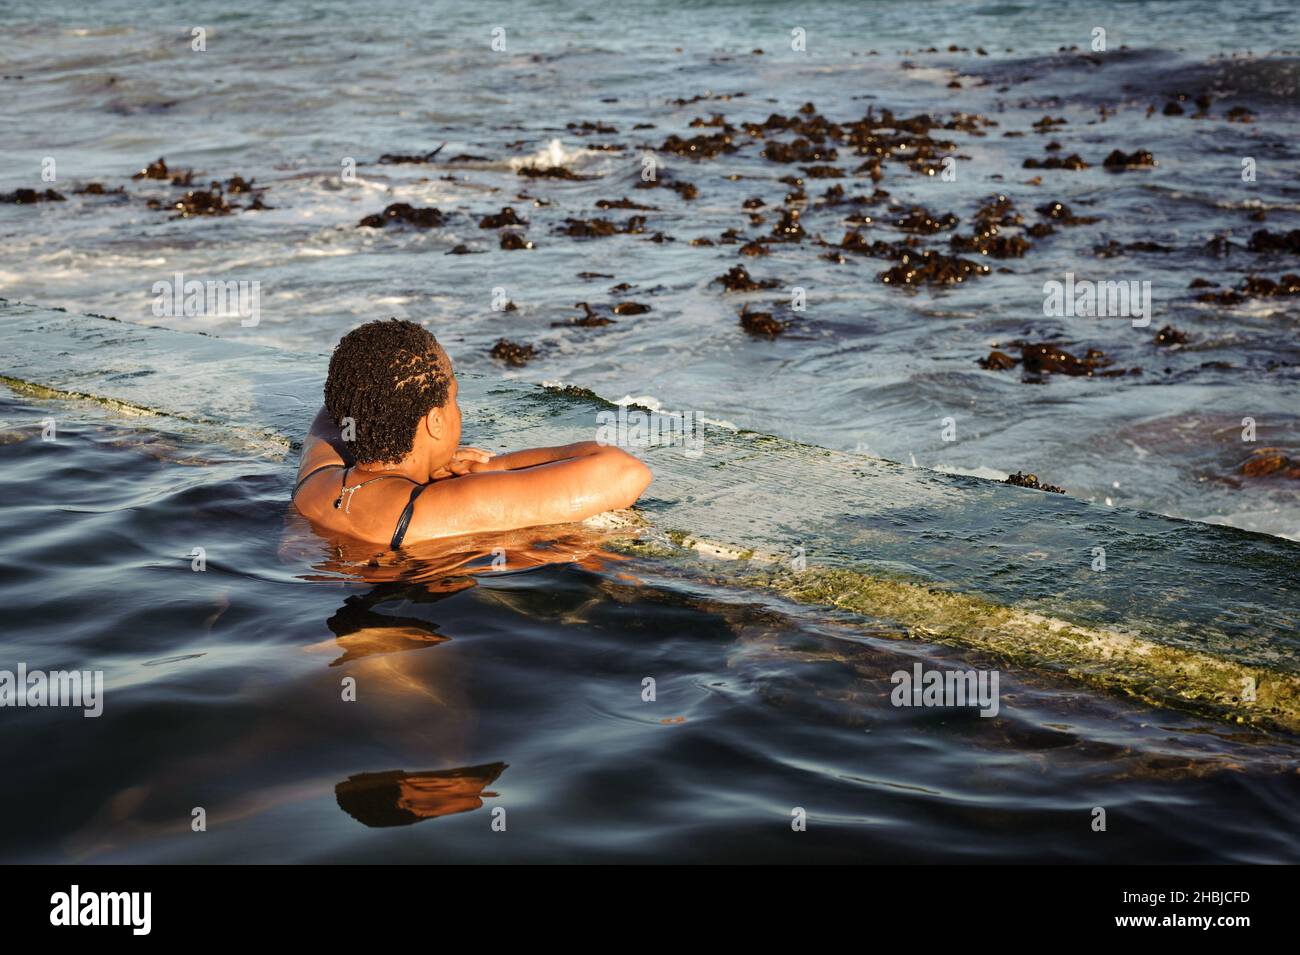 Contemplating South Africa's False Bay coastline from the St James' Dalebrook tidal pool near Cape Town Stock Photo